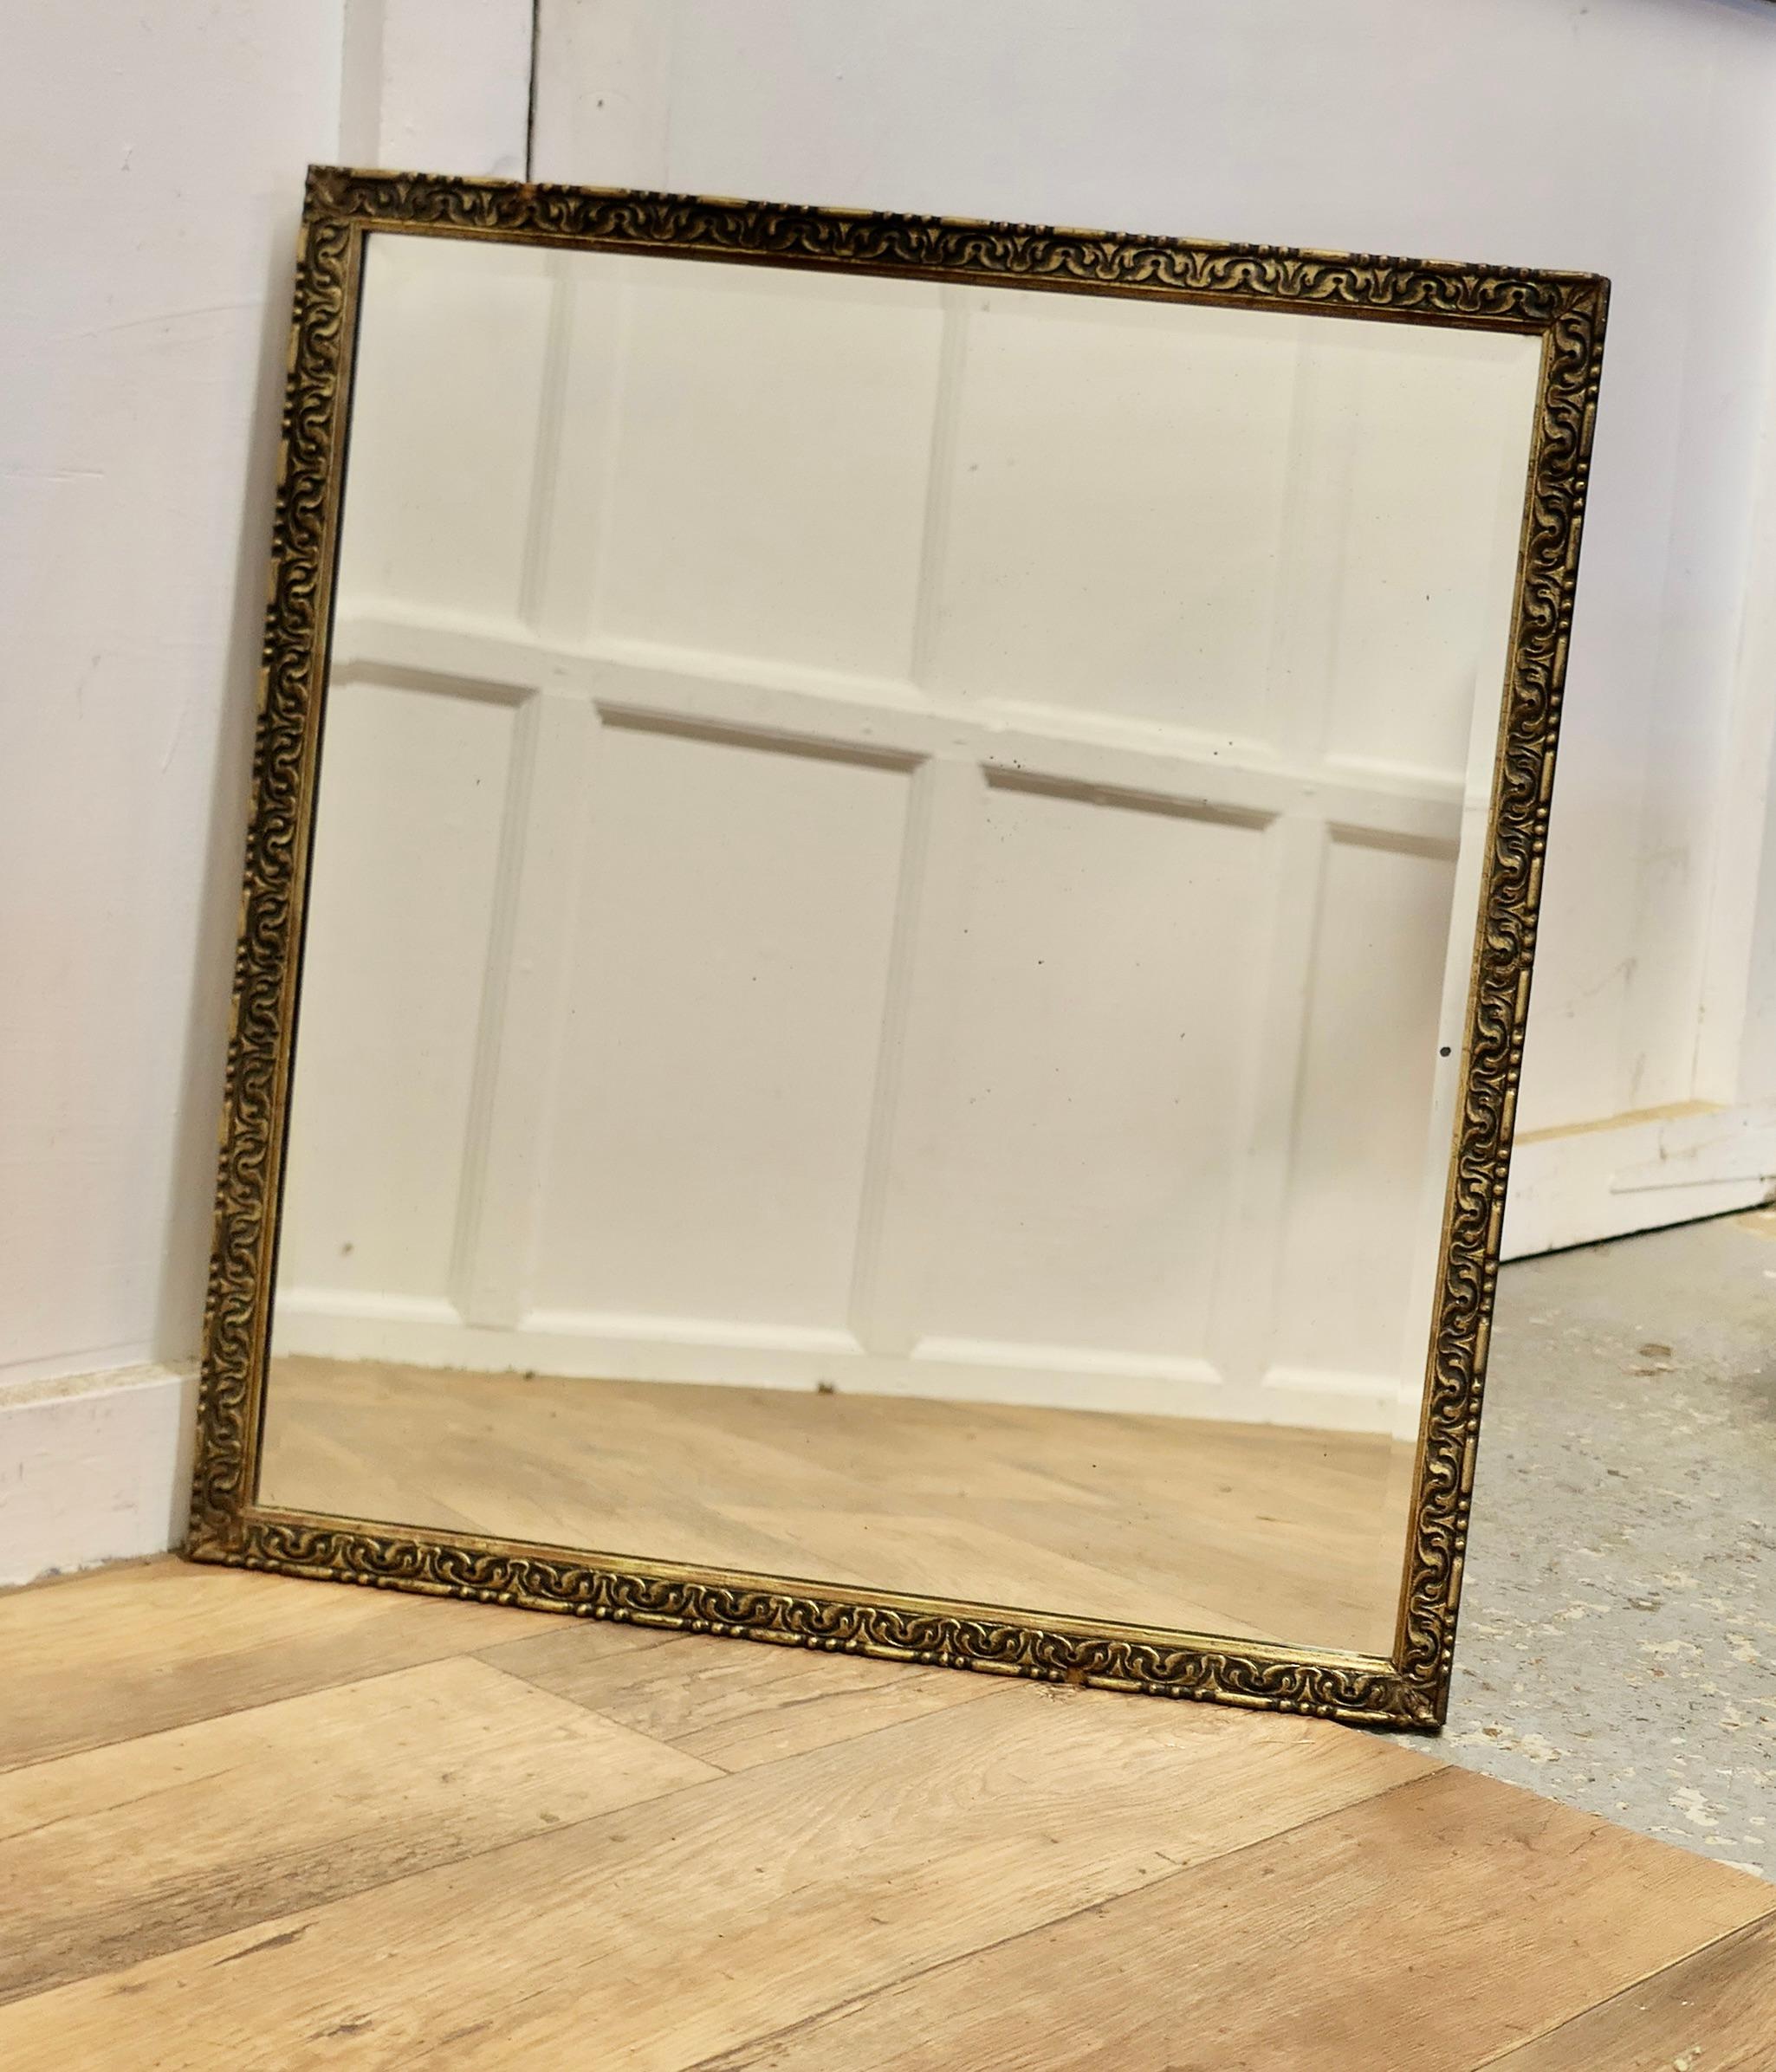 A Large Decorative Gilt Wall Mirror

A delightful piece, the mirror has a 1” wide Gilt moulded frame in tones of gold, the thick bevelled looking glass is in good and in unblemished condition. 
A good decorative piece
The frame is 29” high and 66”